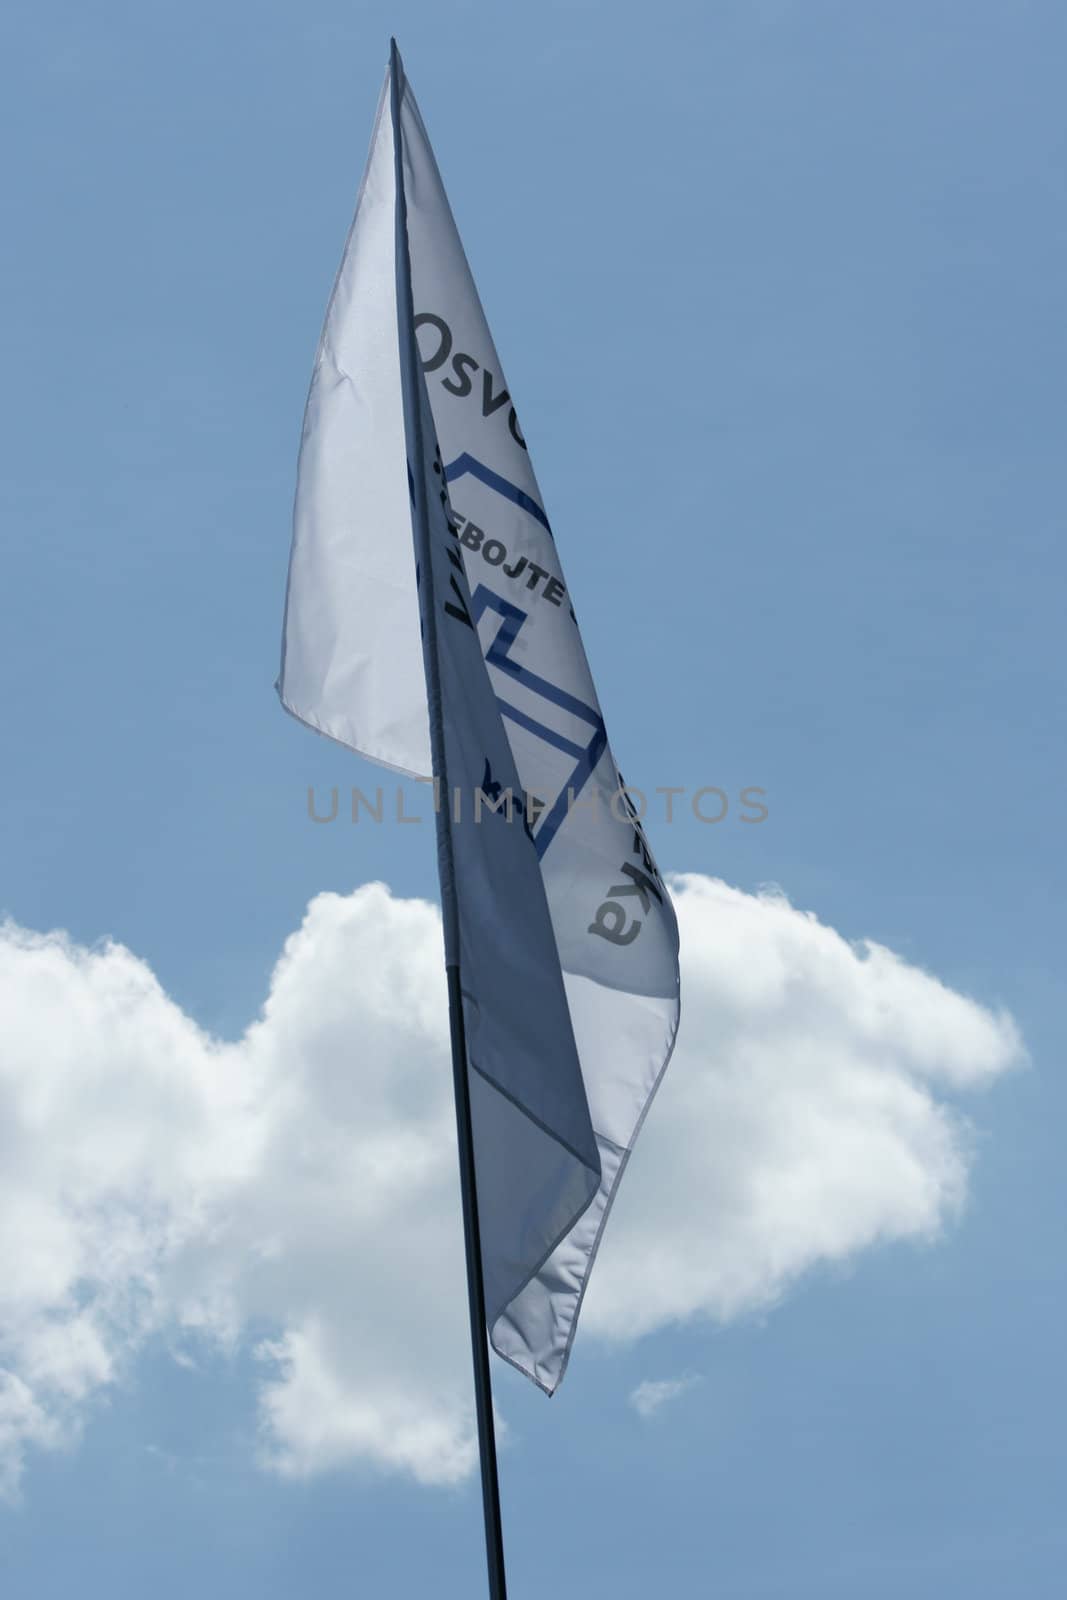 flag in mast of "crusade the liberation of man"